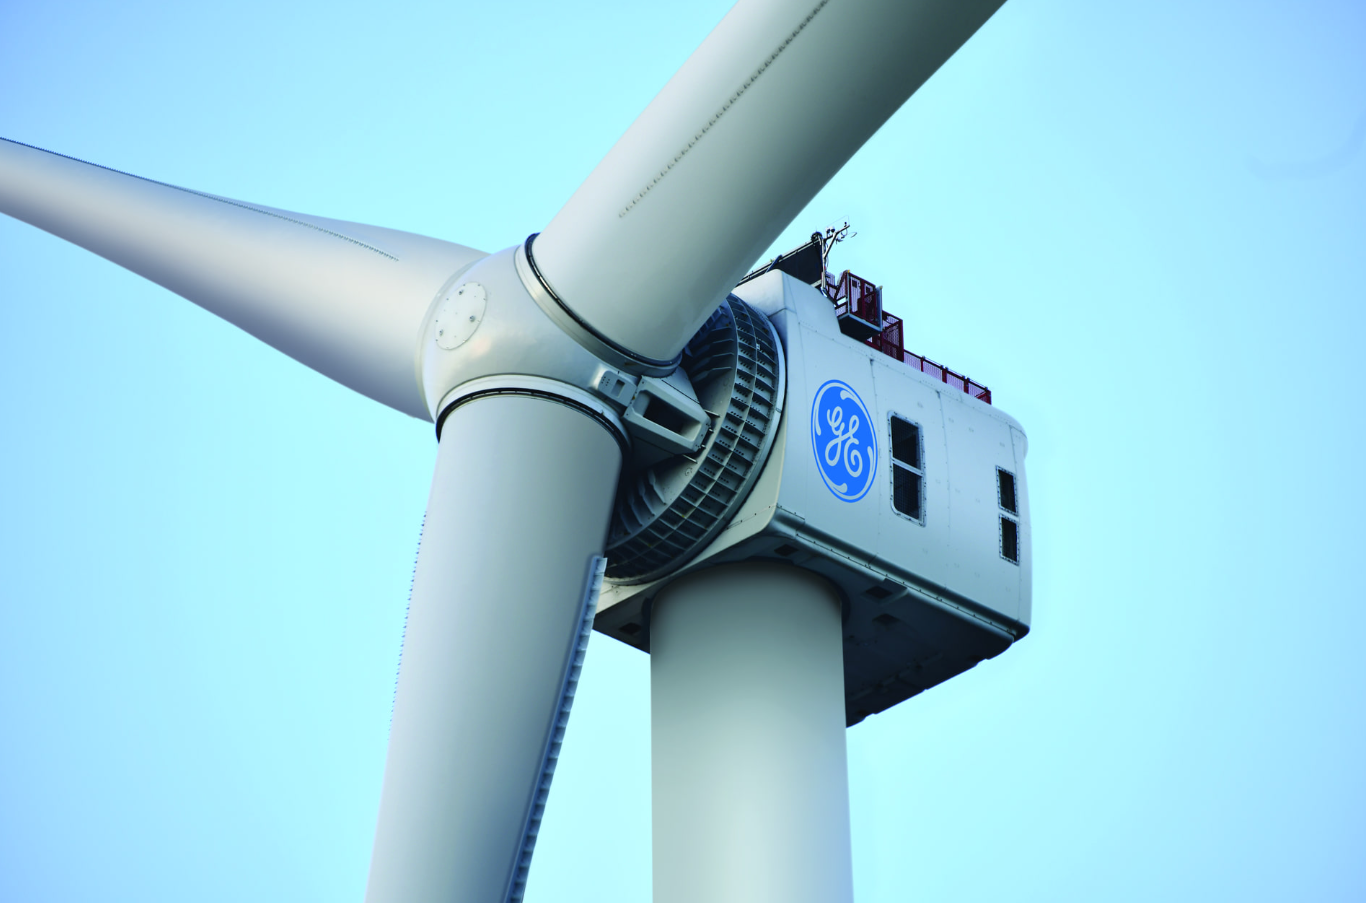 PGE and GE to test green hydrogen production using offshore wind turbine